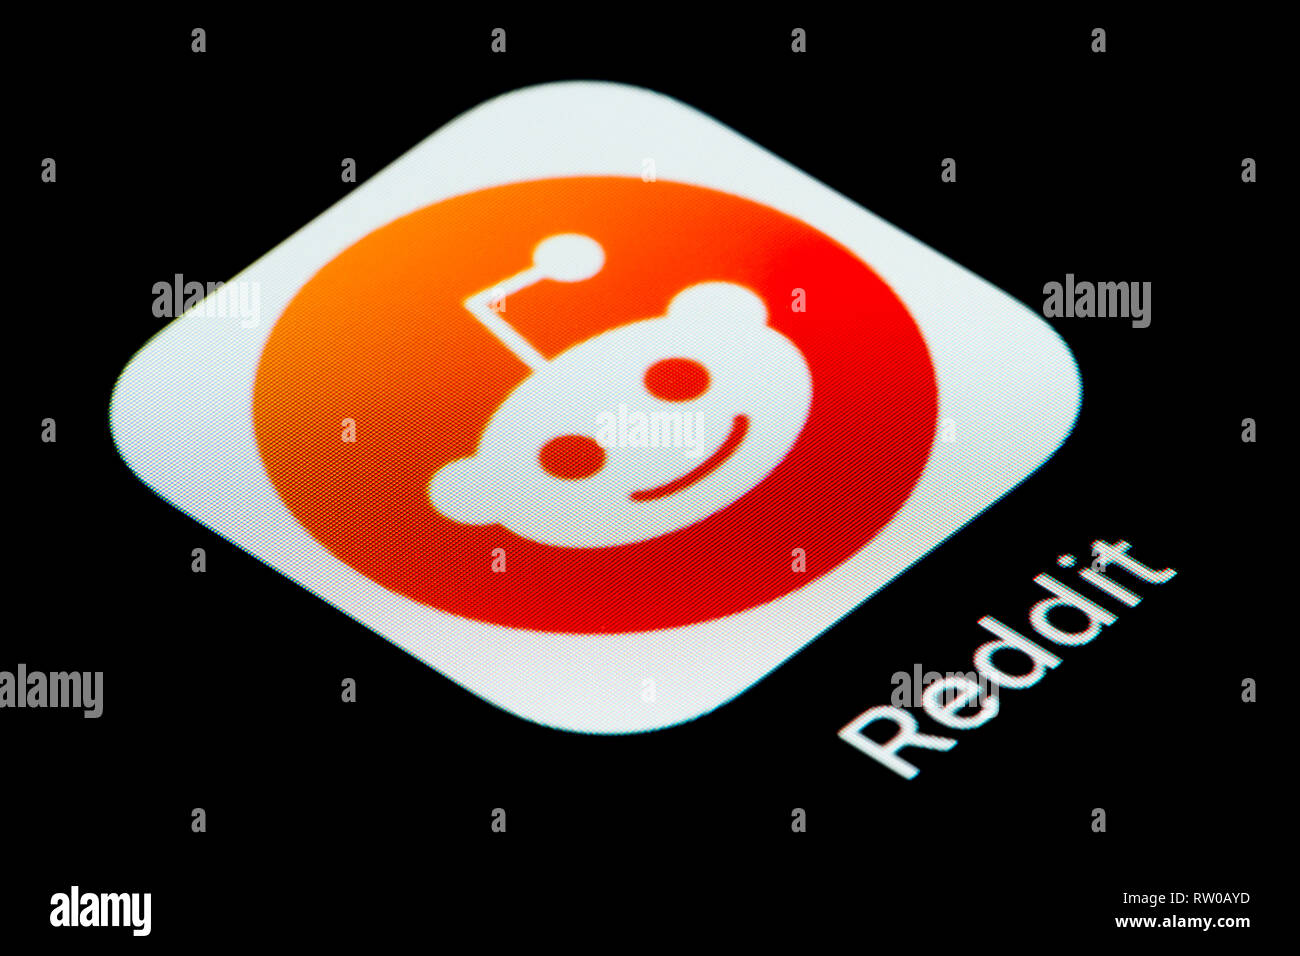 A Close Up Shot Of The Reddit App Icon As Seen On The Screen Of A